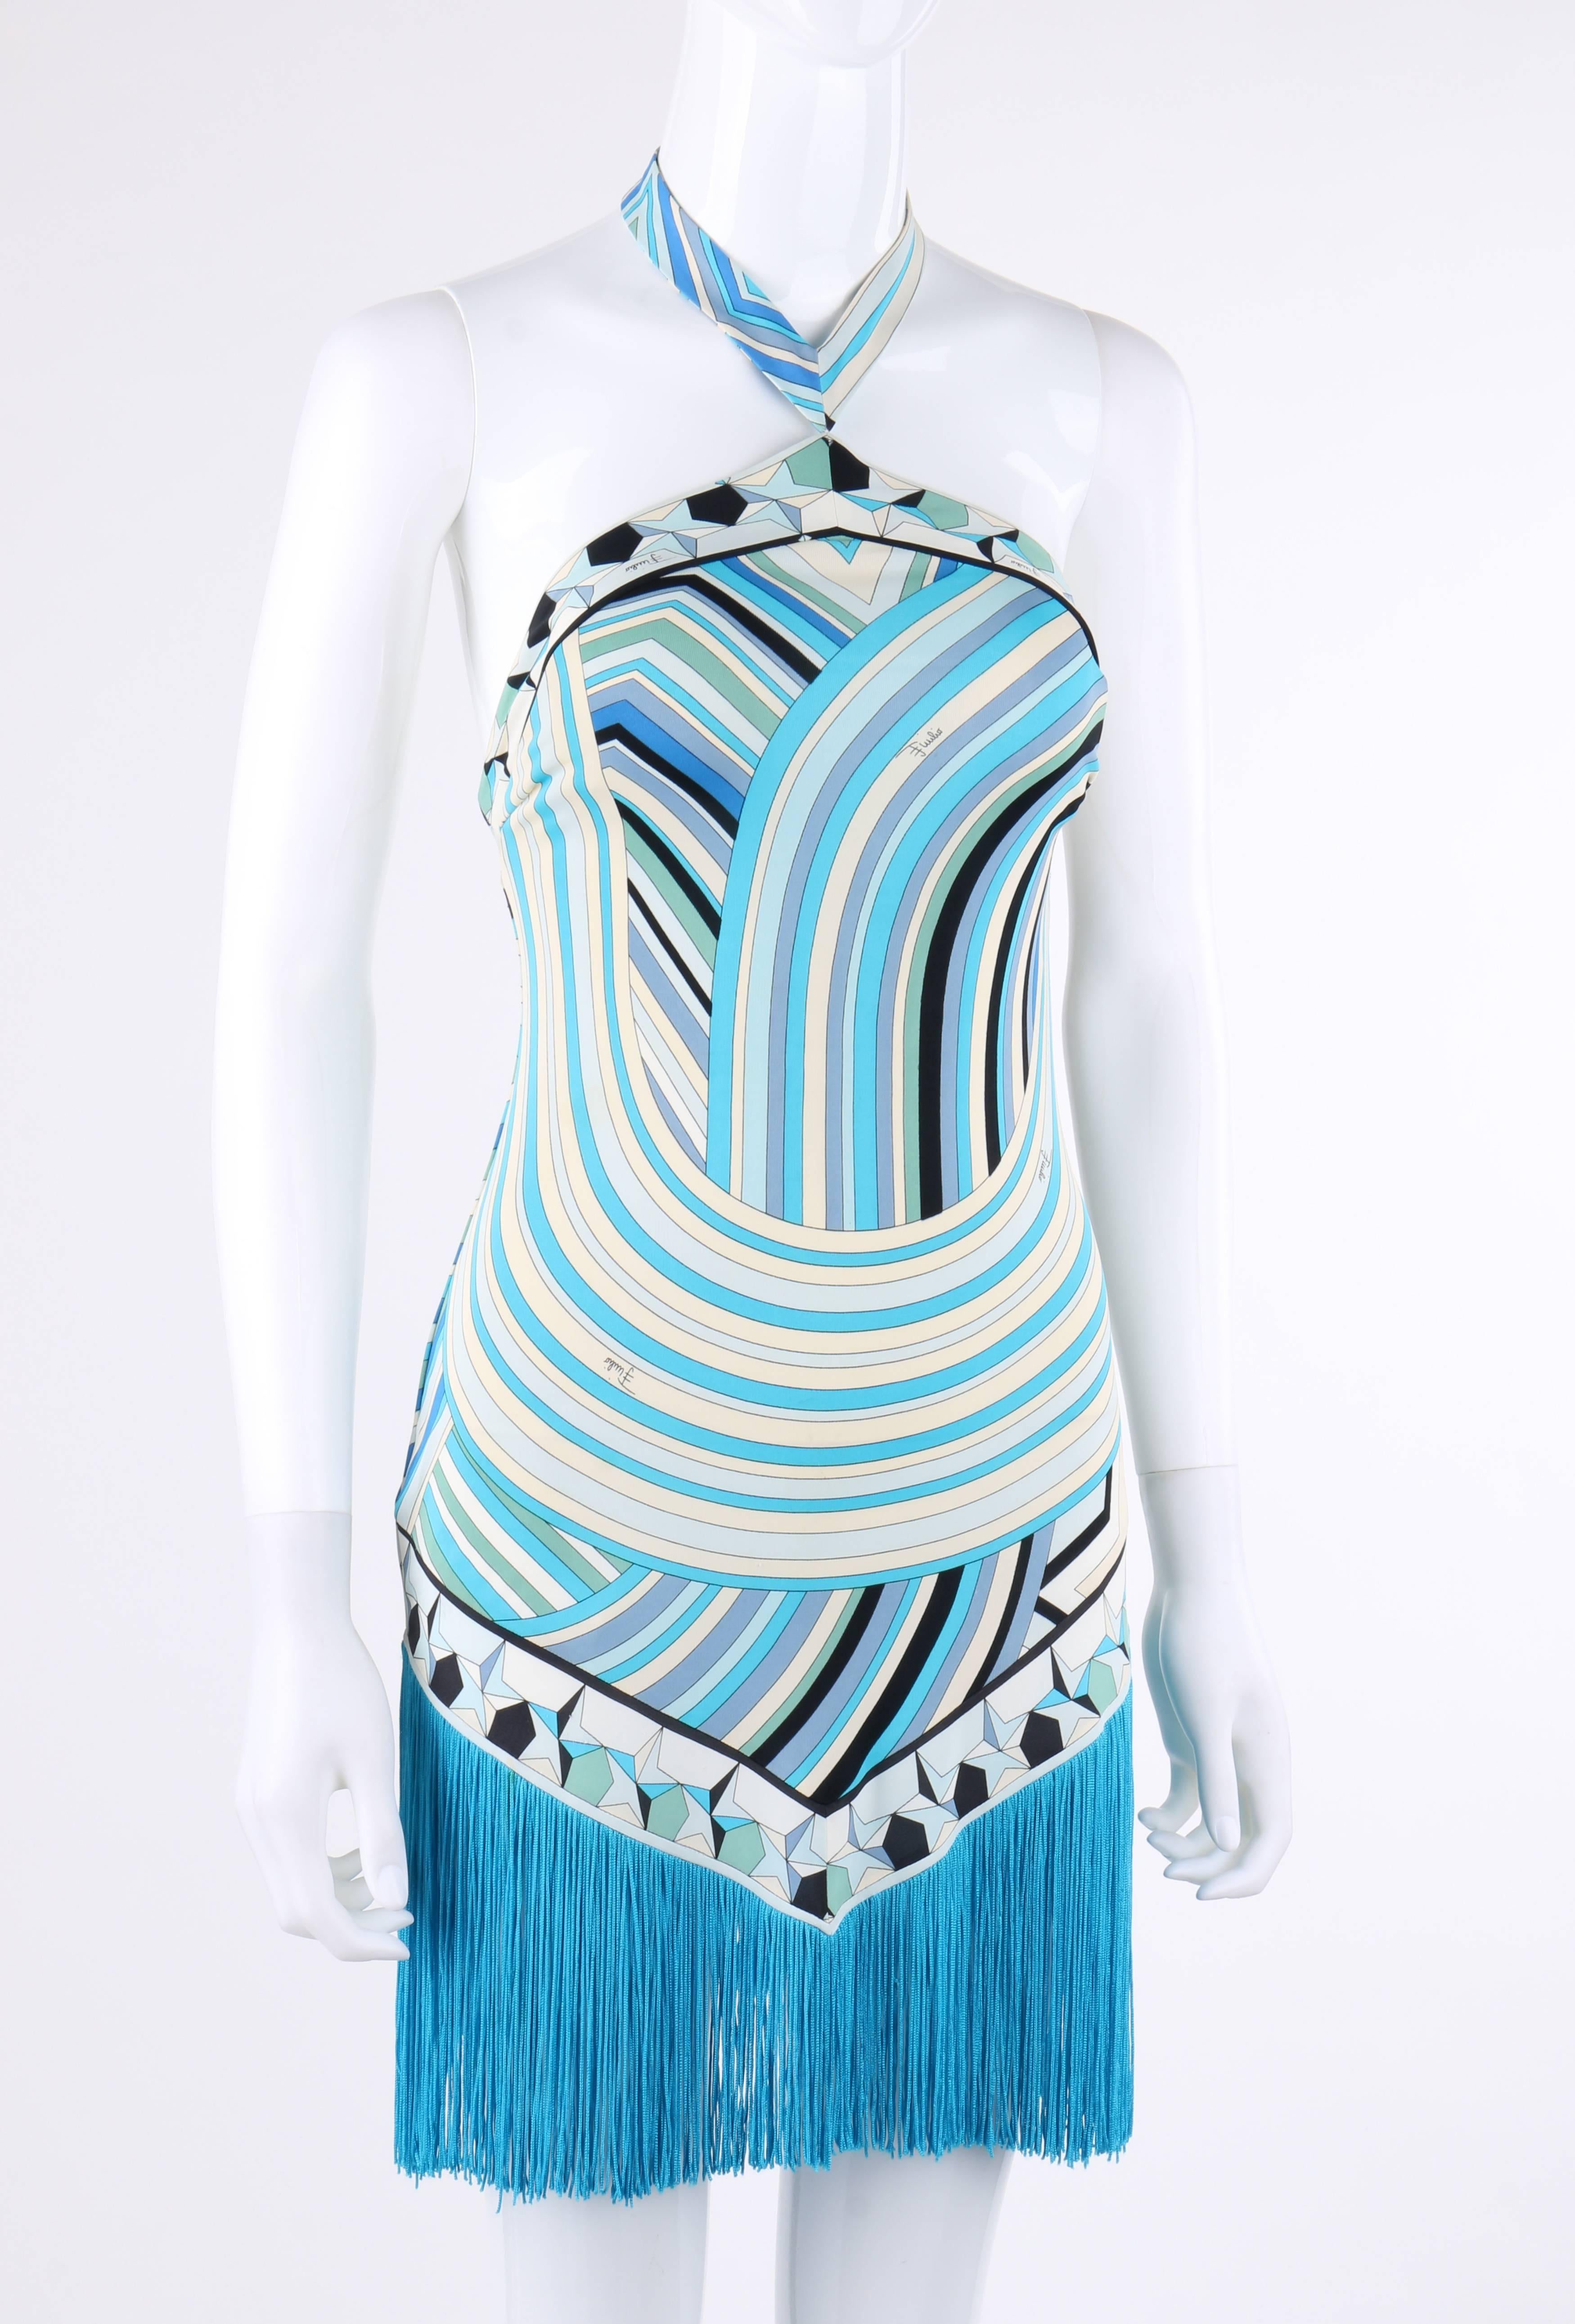 Emilio Pucci Spring/Summer 2008 halter top mini dress (which could double as a stunning beach cover). Multicolor signature star print in shades of blue, ivory, green, black, and white. Halter top with two button and loop closure at center back. Low